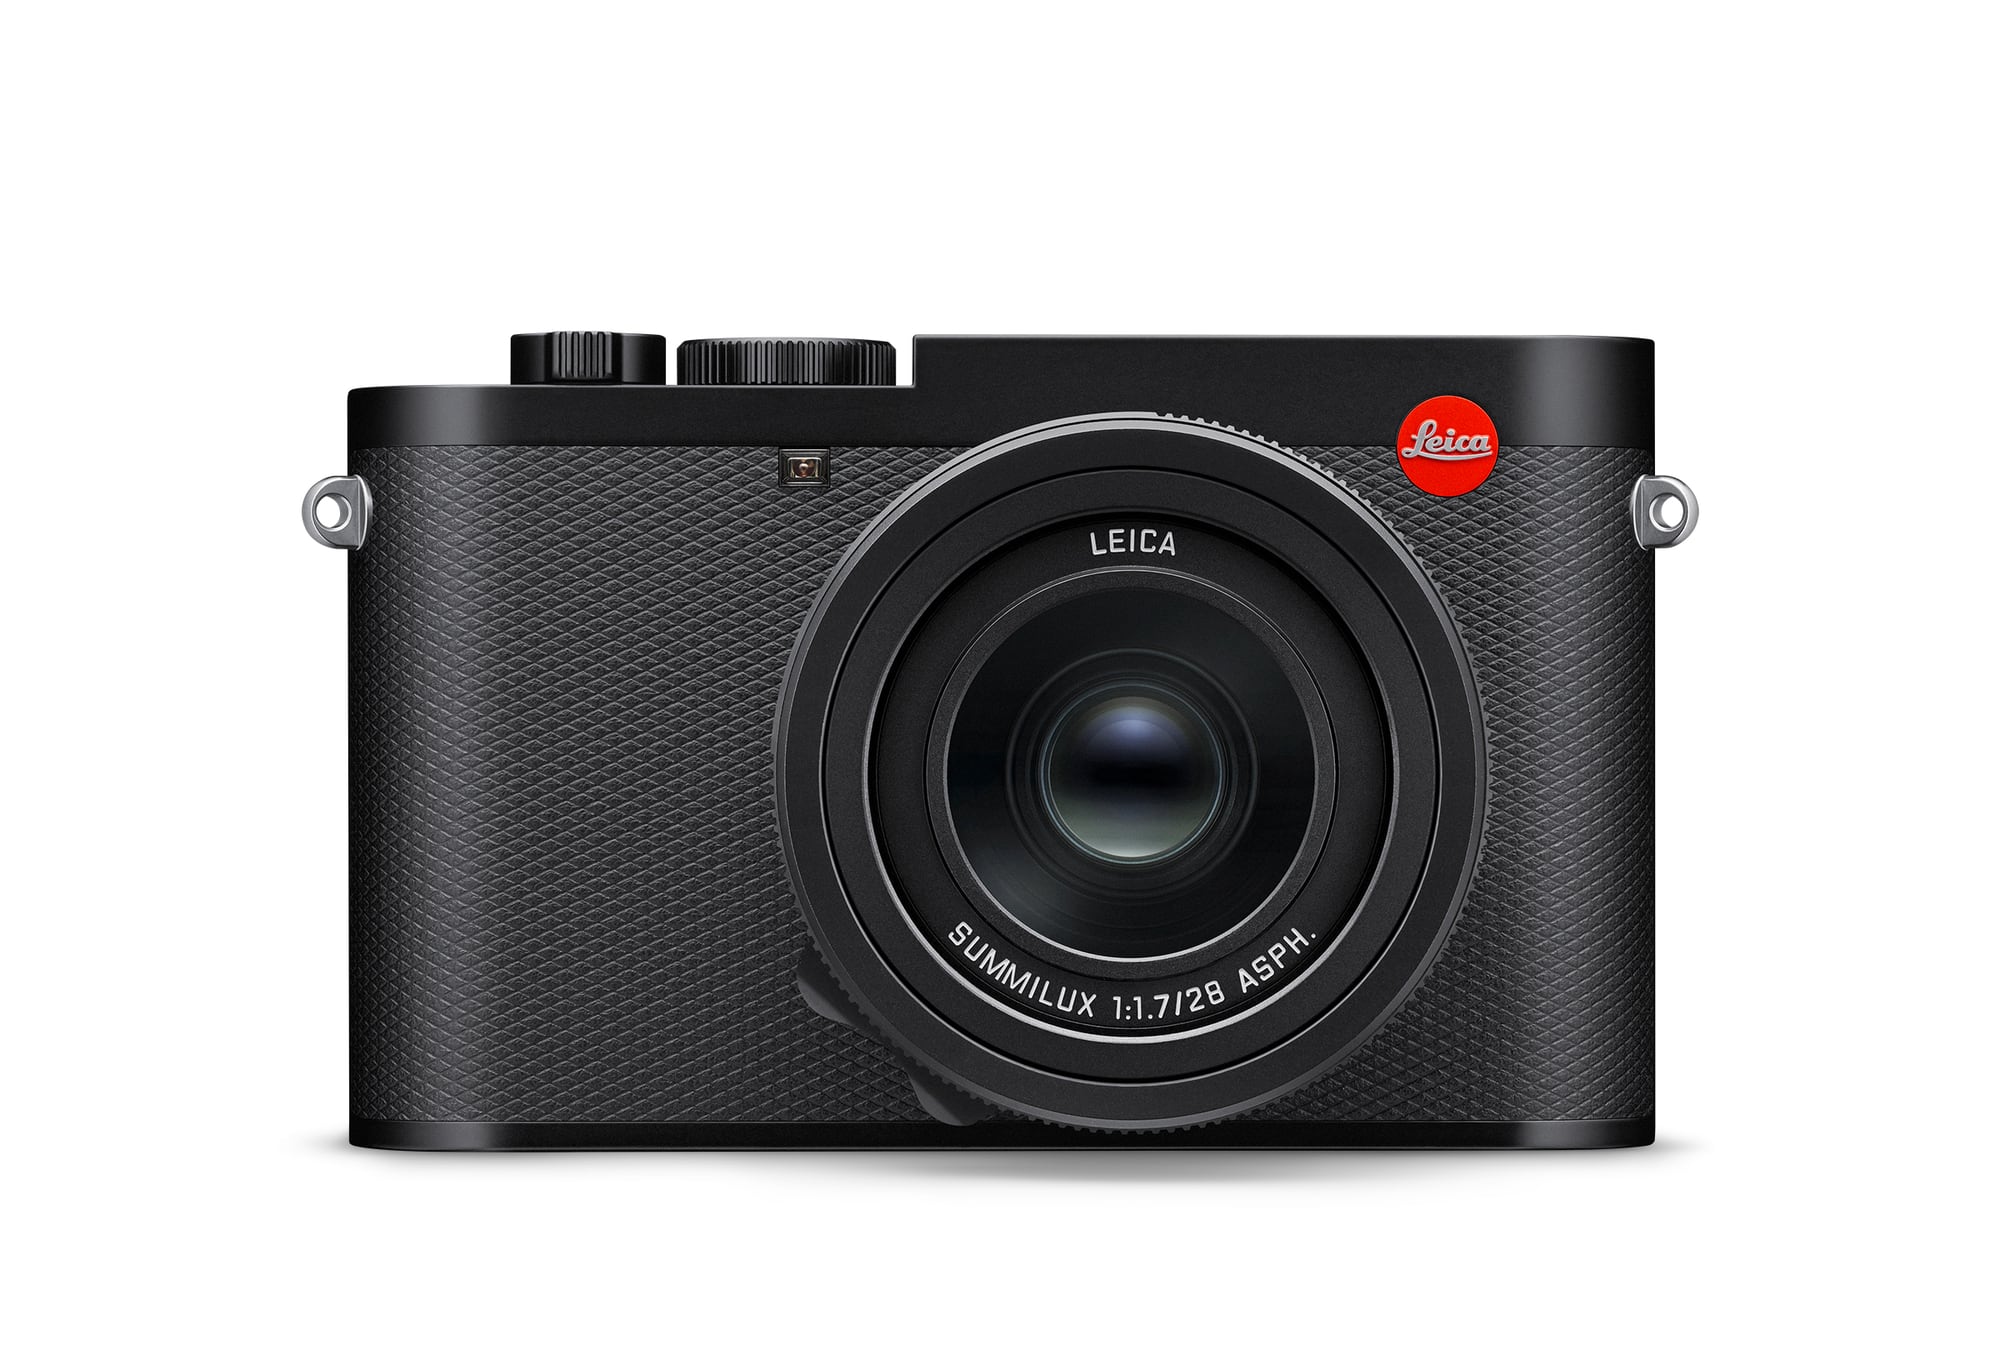 Leica launches Q3, its latest fixed-lens full-frame camera